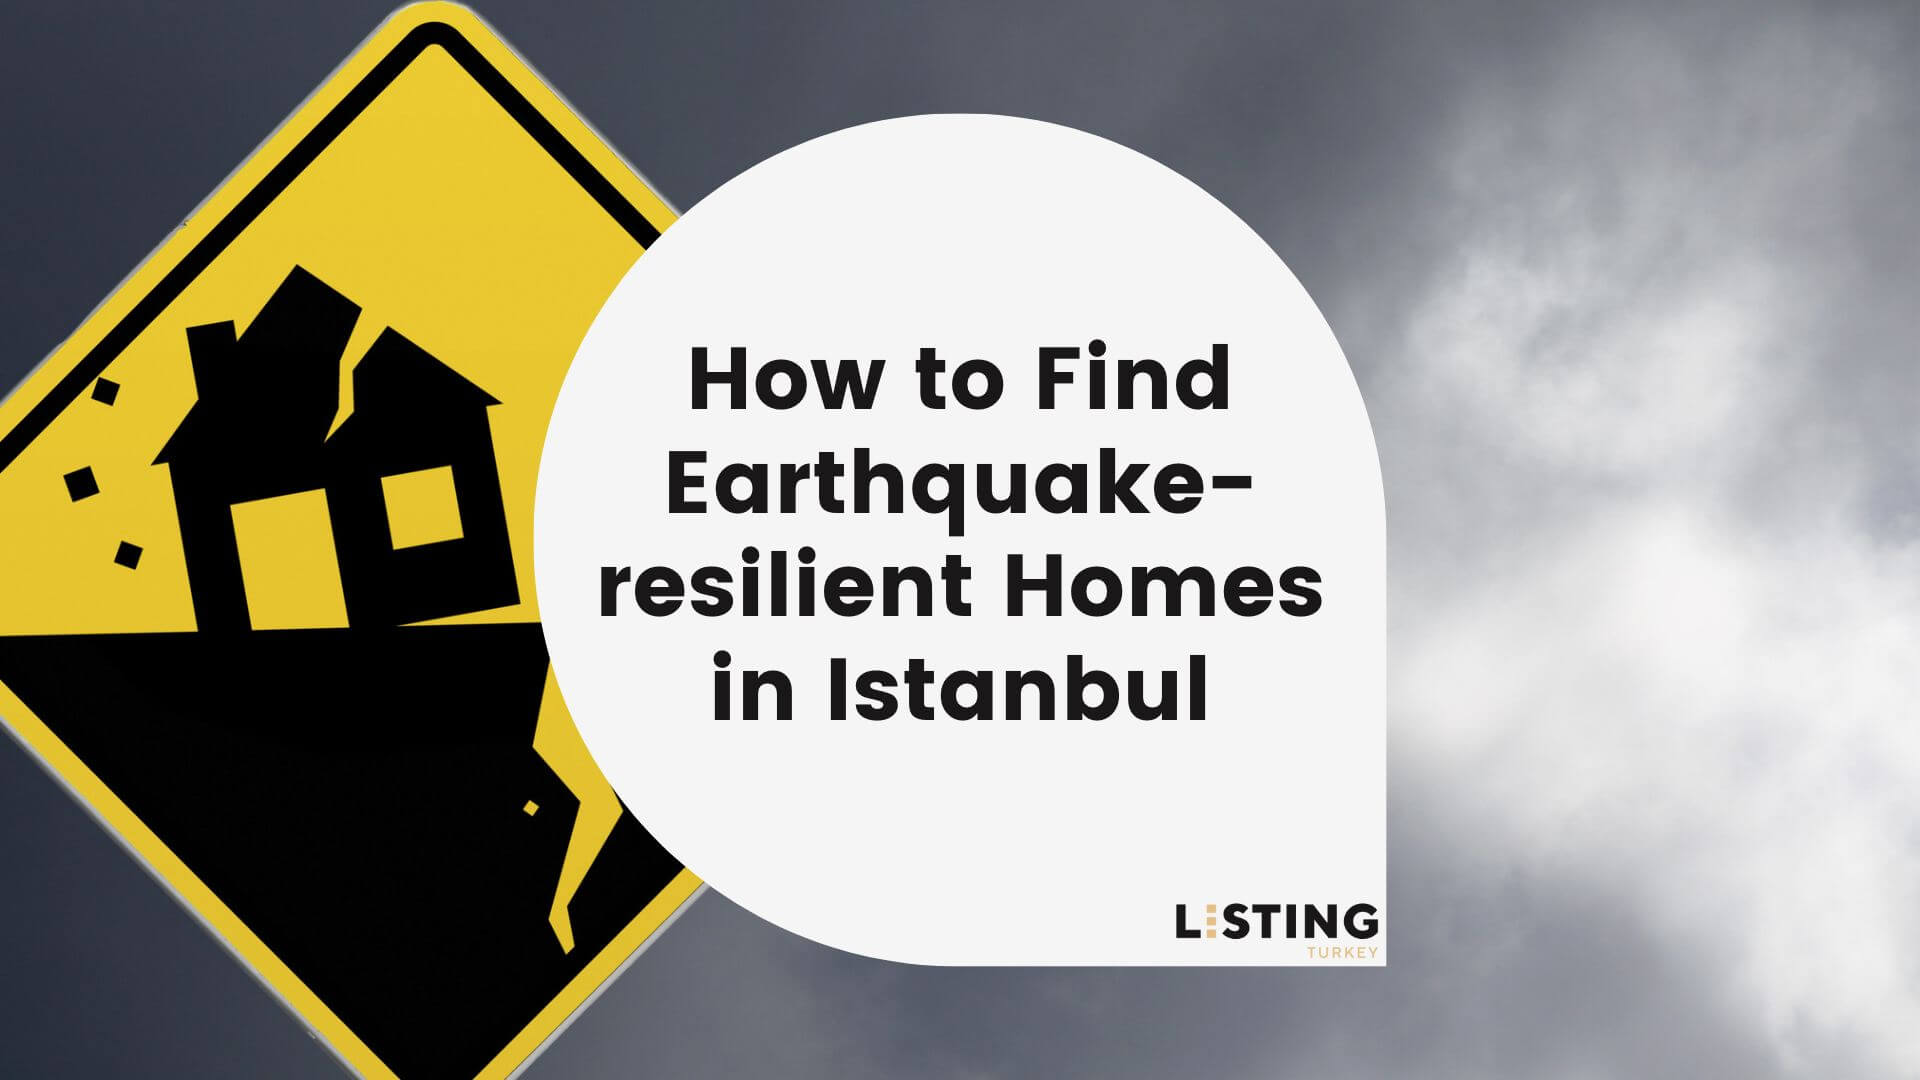 How to Find Earthquake-resilient Homes in Istanbul